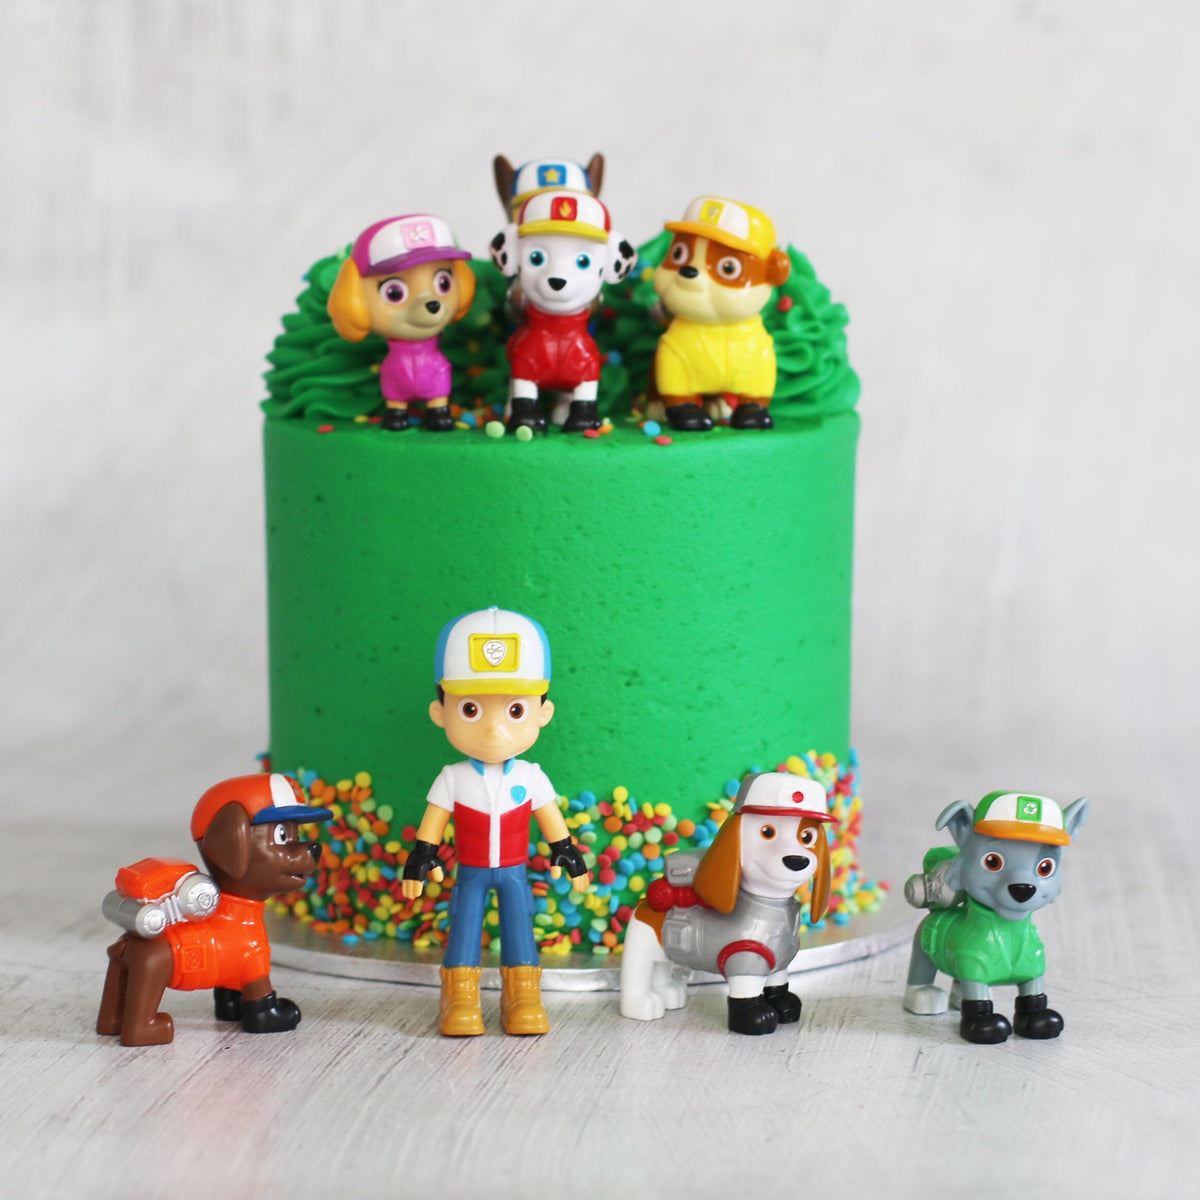 Paw Patrol Cake The Cupcake Queens 